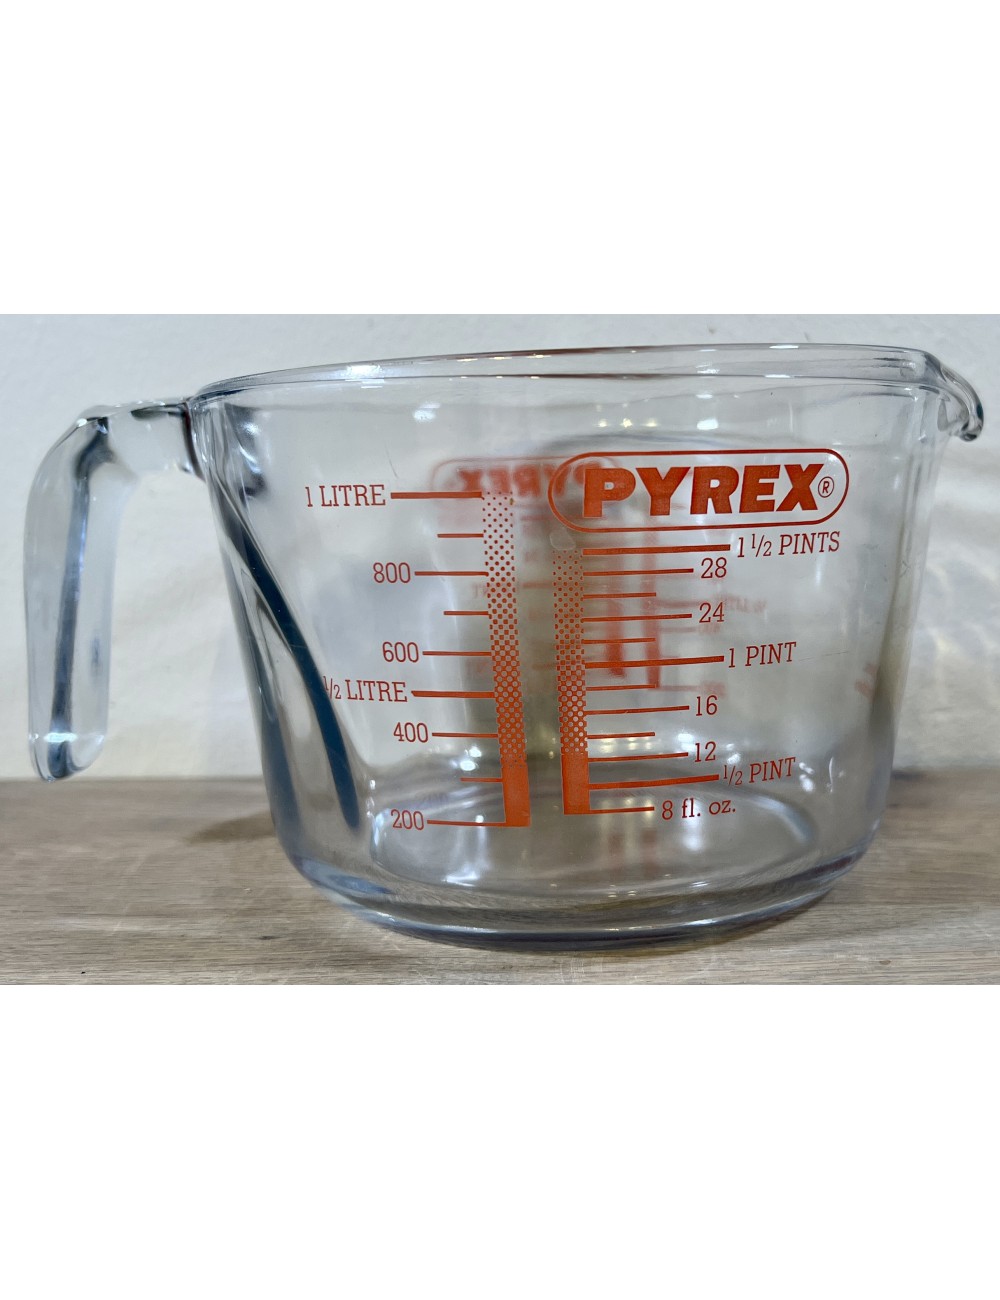 https://www.ramblingrose.nl/14515-large_default/measuring-cup-pyrex-thick-glass-model-with-size-markings.jpg